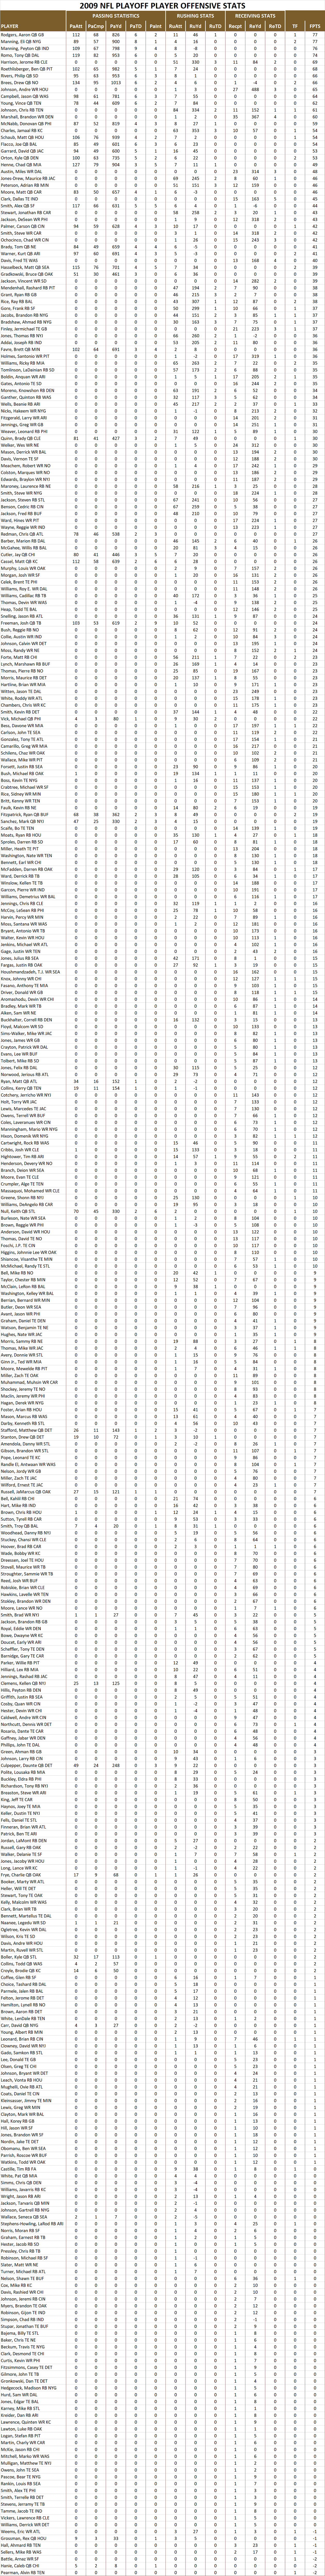 2009 National Football League Pool Playoff Player Offensive Stats